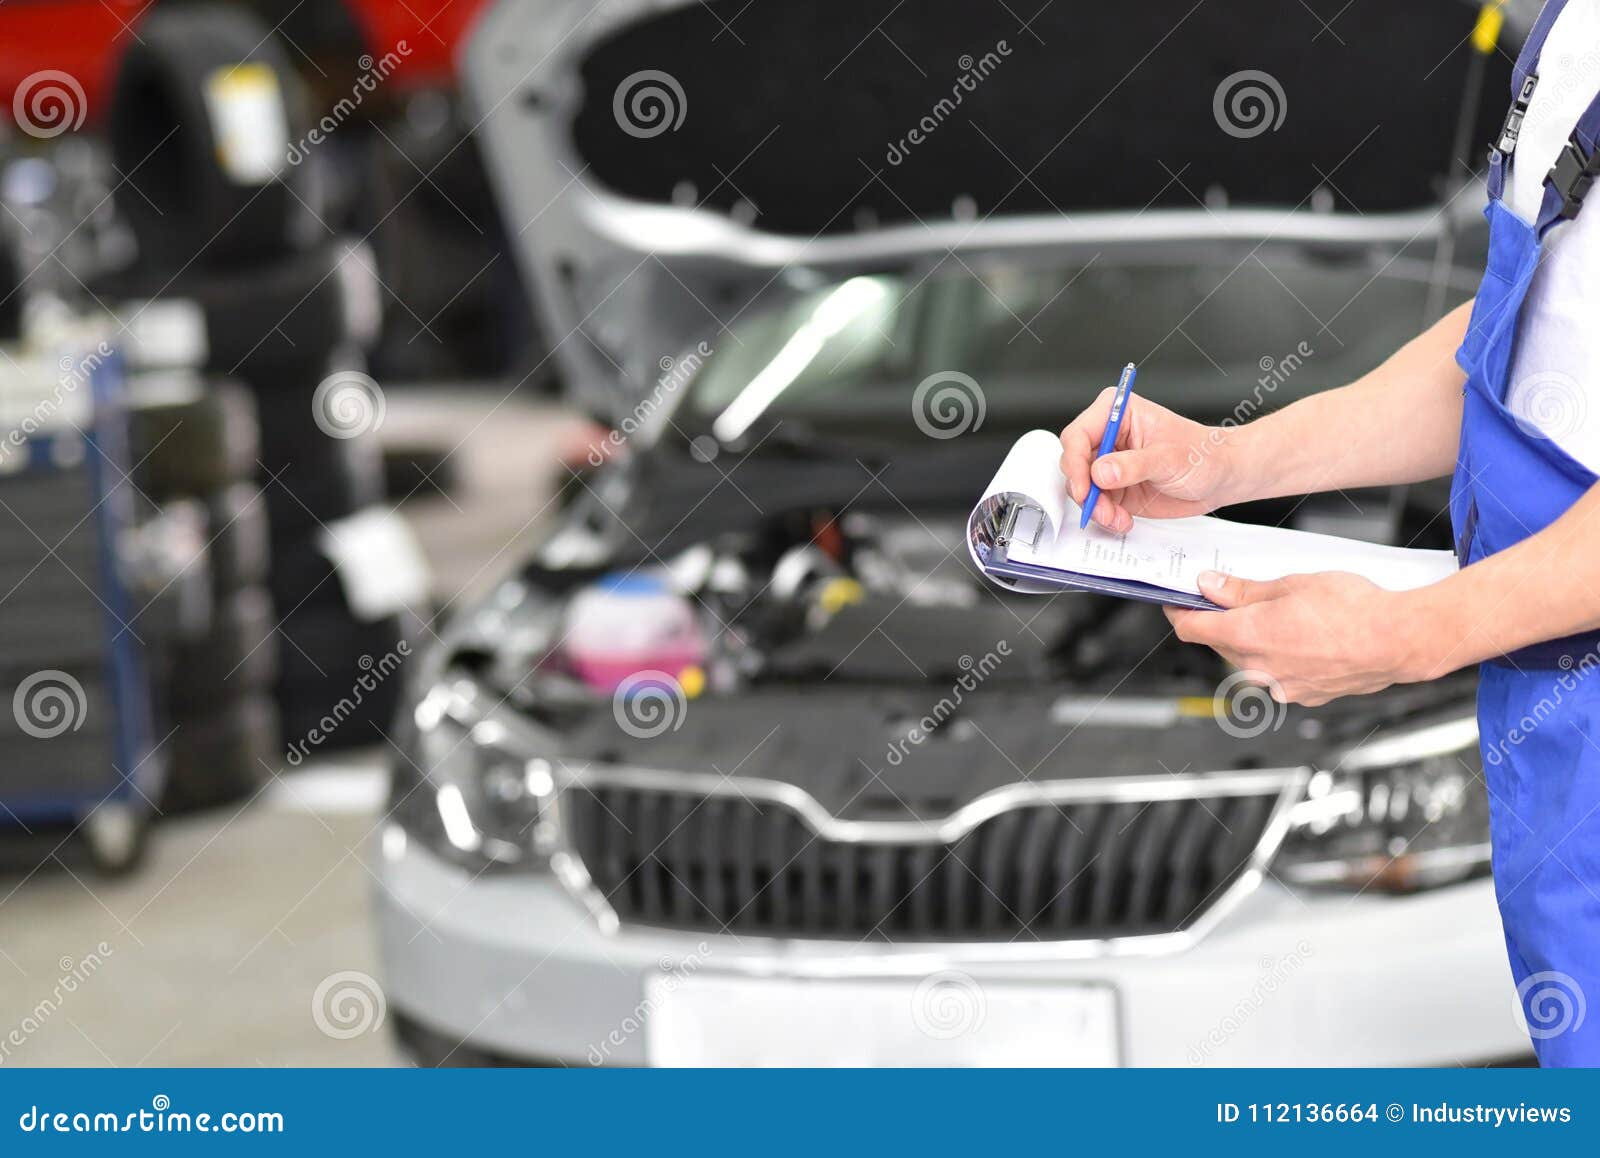 service and inspection of a car in a workshop - mechanic inspect